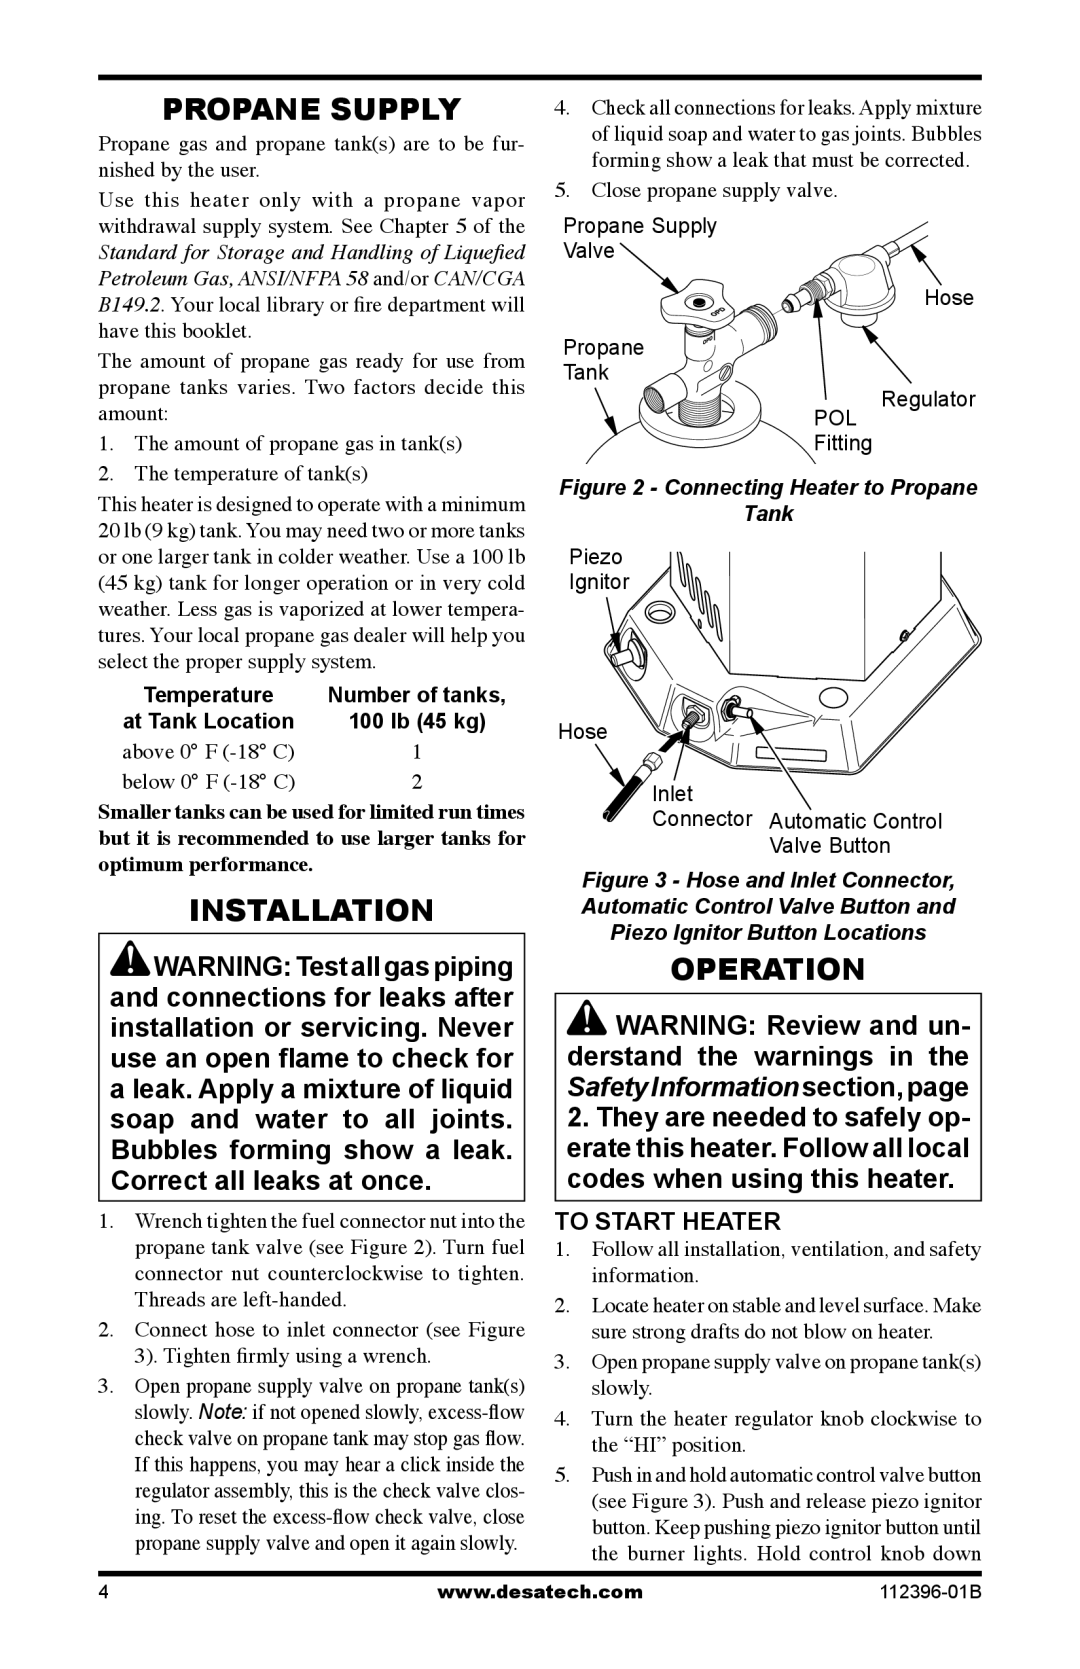 Desa Btu, Hr owner manual Propane Supply, Installation, Operation, WARNING Testallgaspiping, and connections for leaks after 